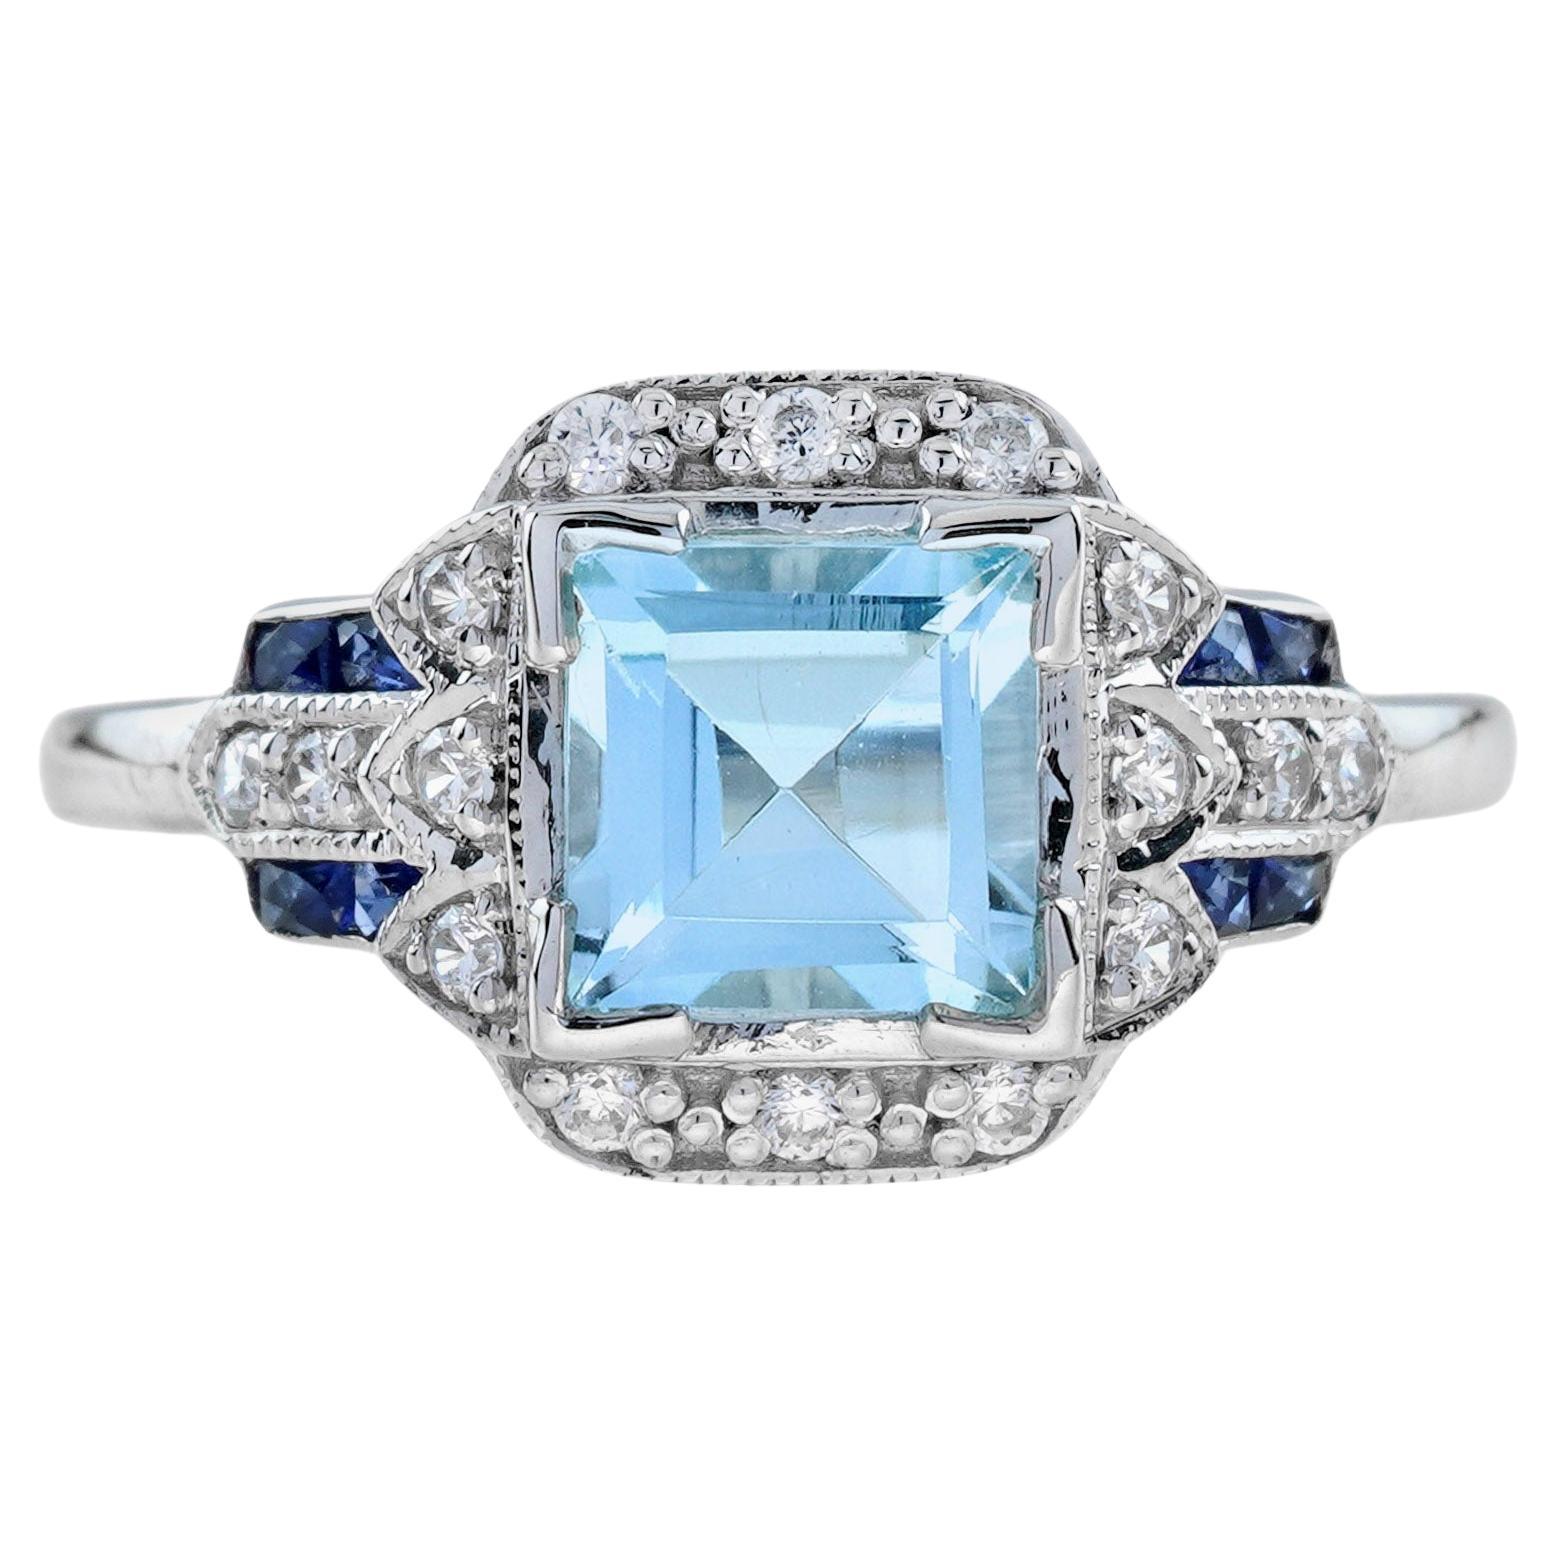 Square Blue Topaz Sapphire Diamond Art Deco Style Engagement Ring in 14K Gold